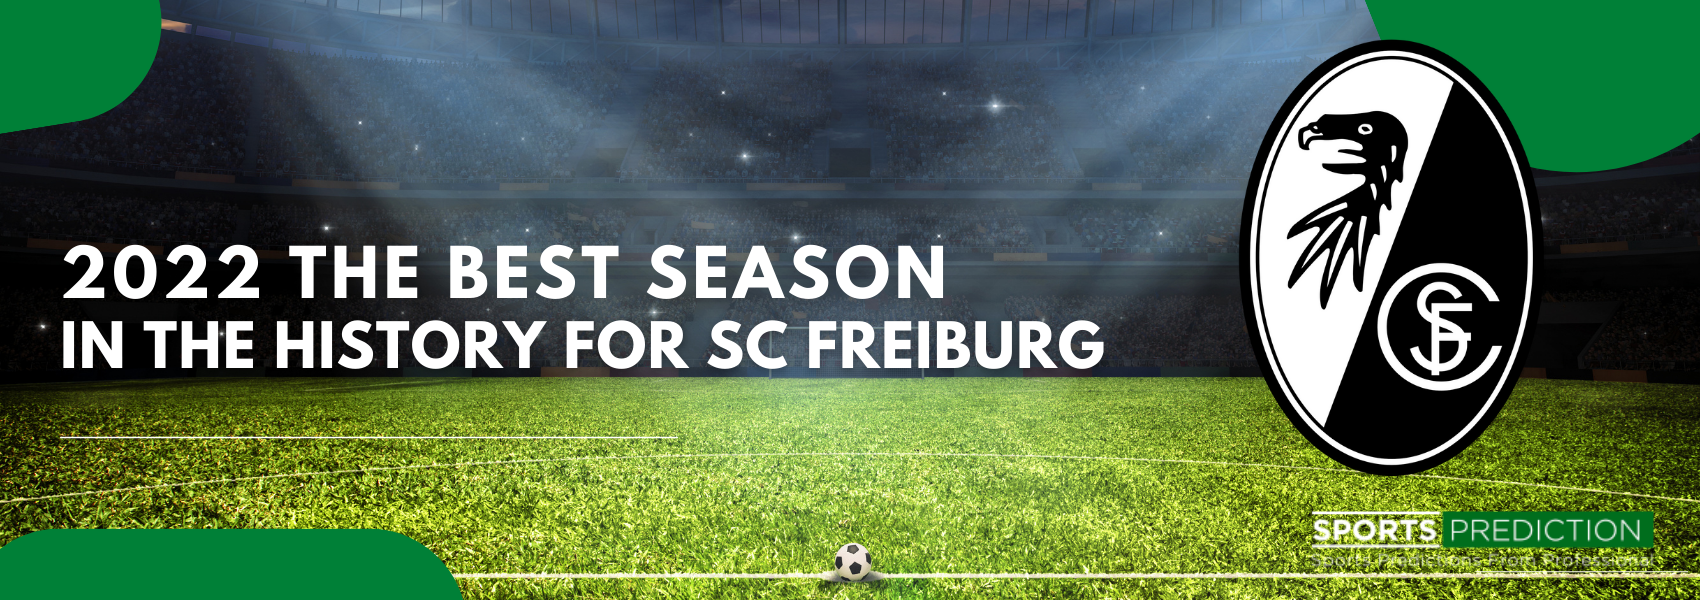 2022 The Best Season In The History For SC Freiburg